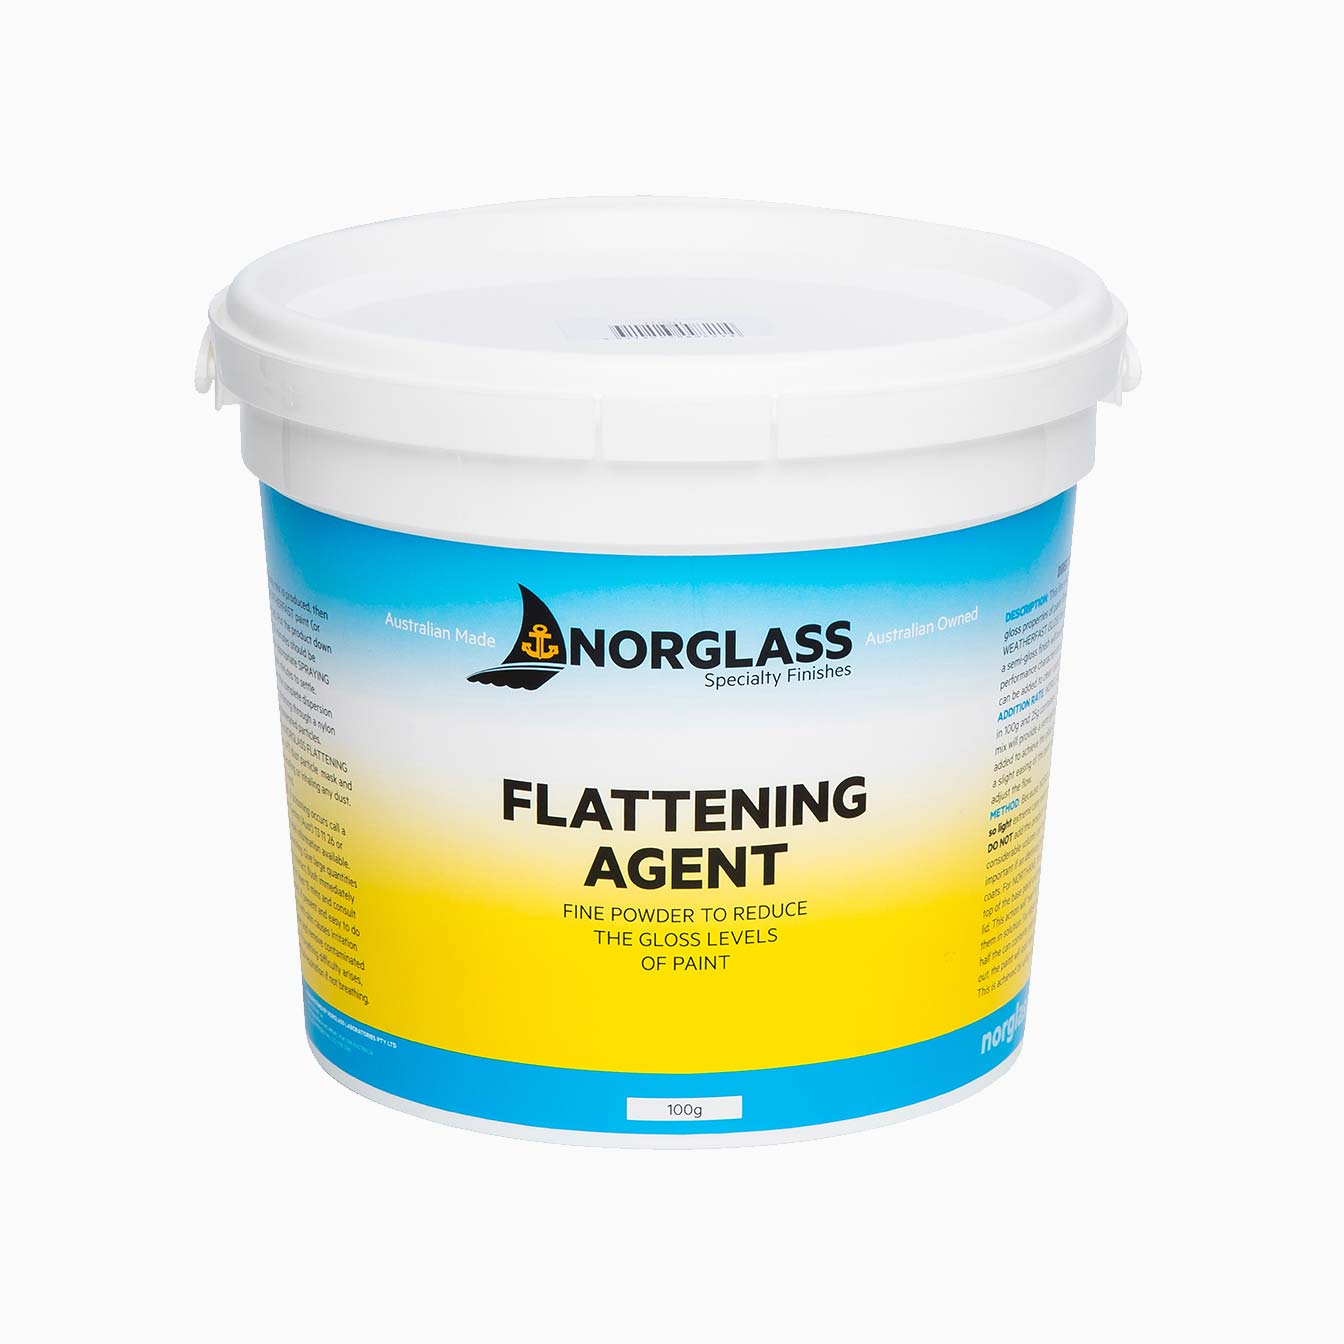 Mötsenböcker's Lift Off® Tape, Label, and Adhesive Remover - Norglass  Paints and Speciality Finishes